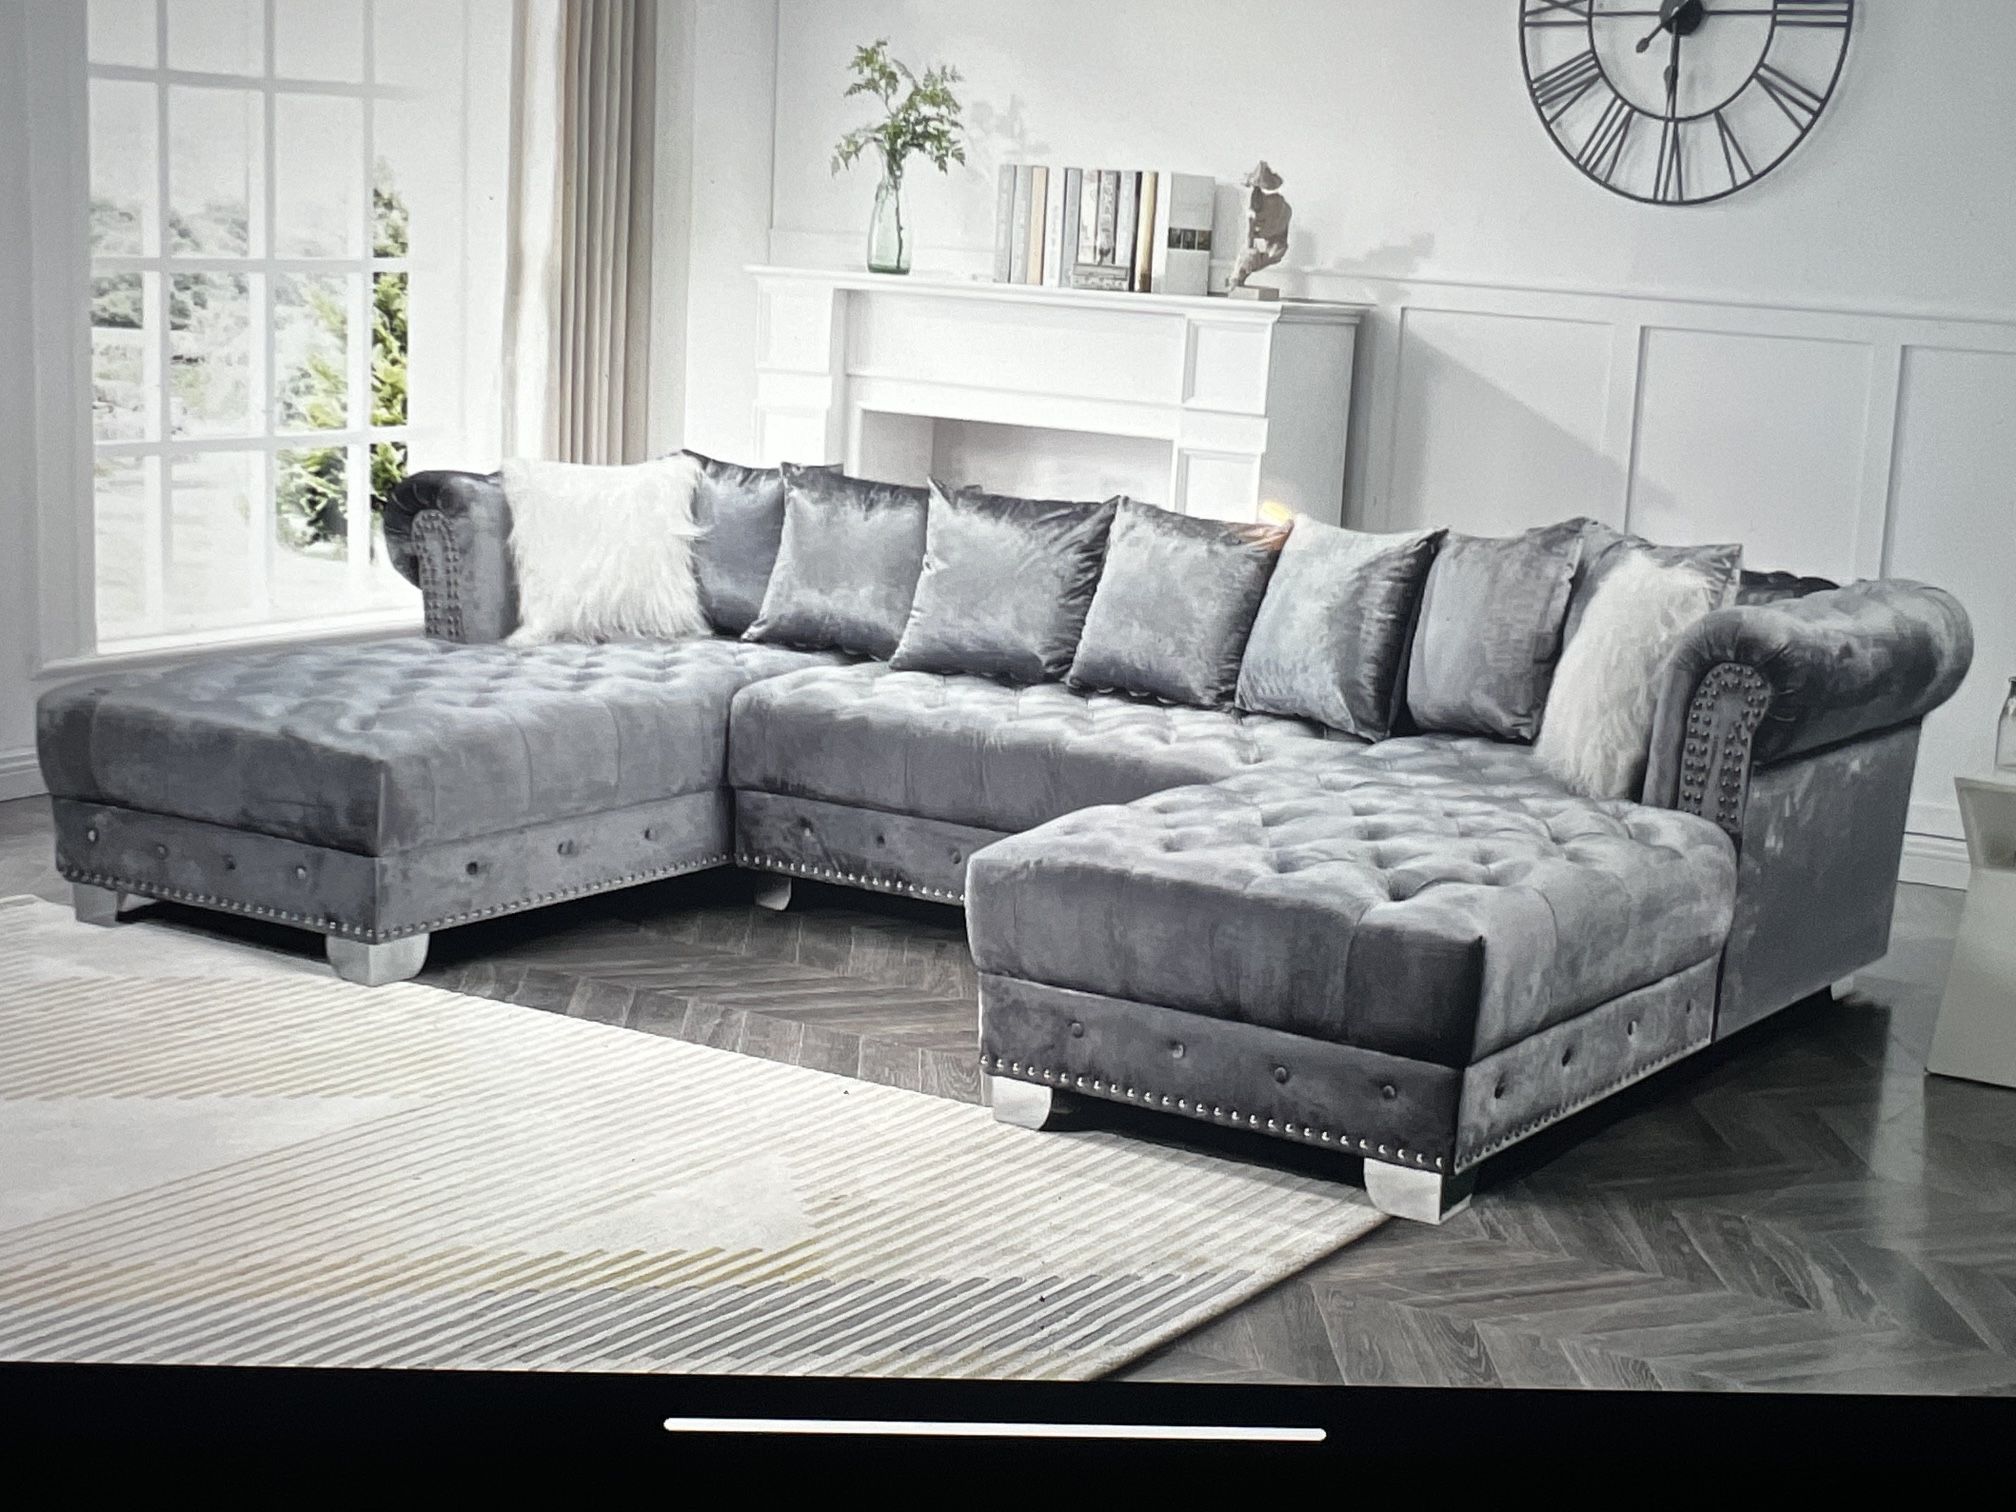 Dark Shadow Grey Velvet Tufted Double Chaise Lounge Sectional Sofa